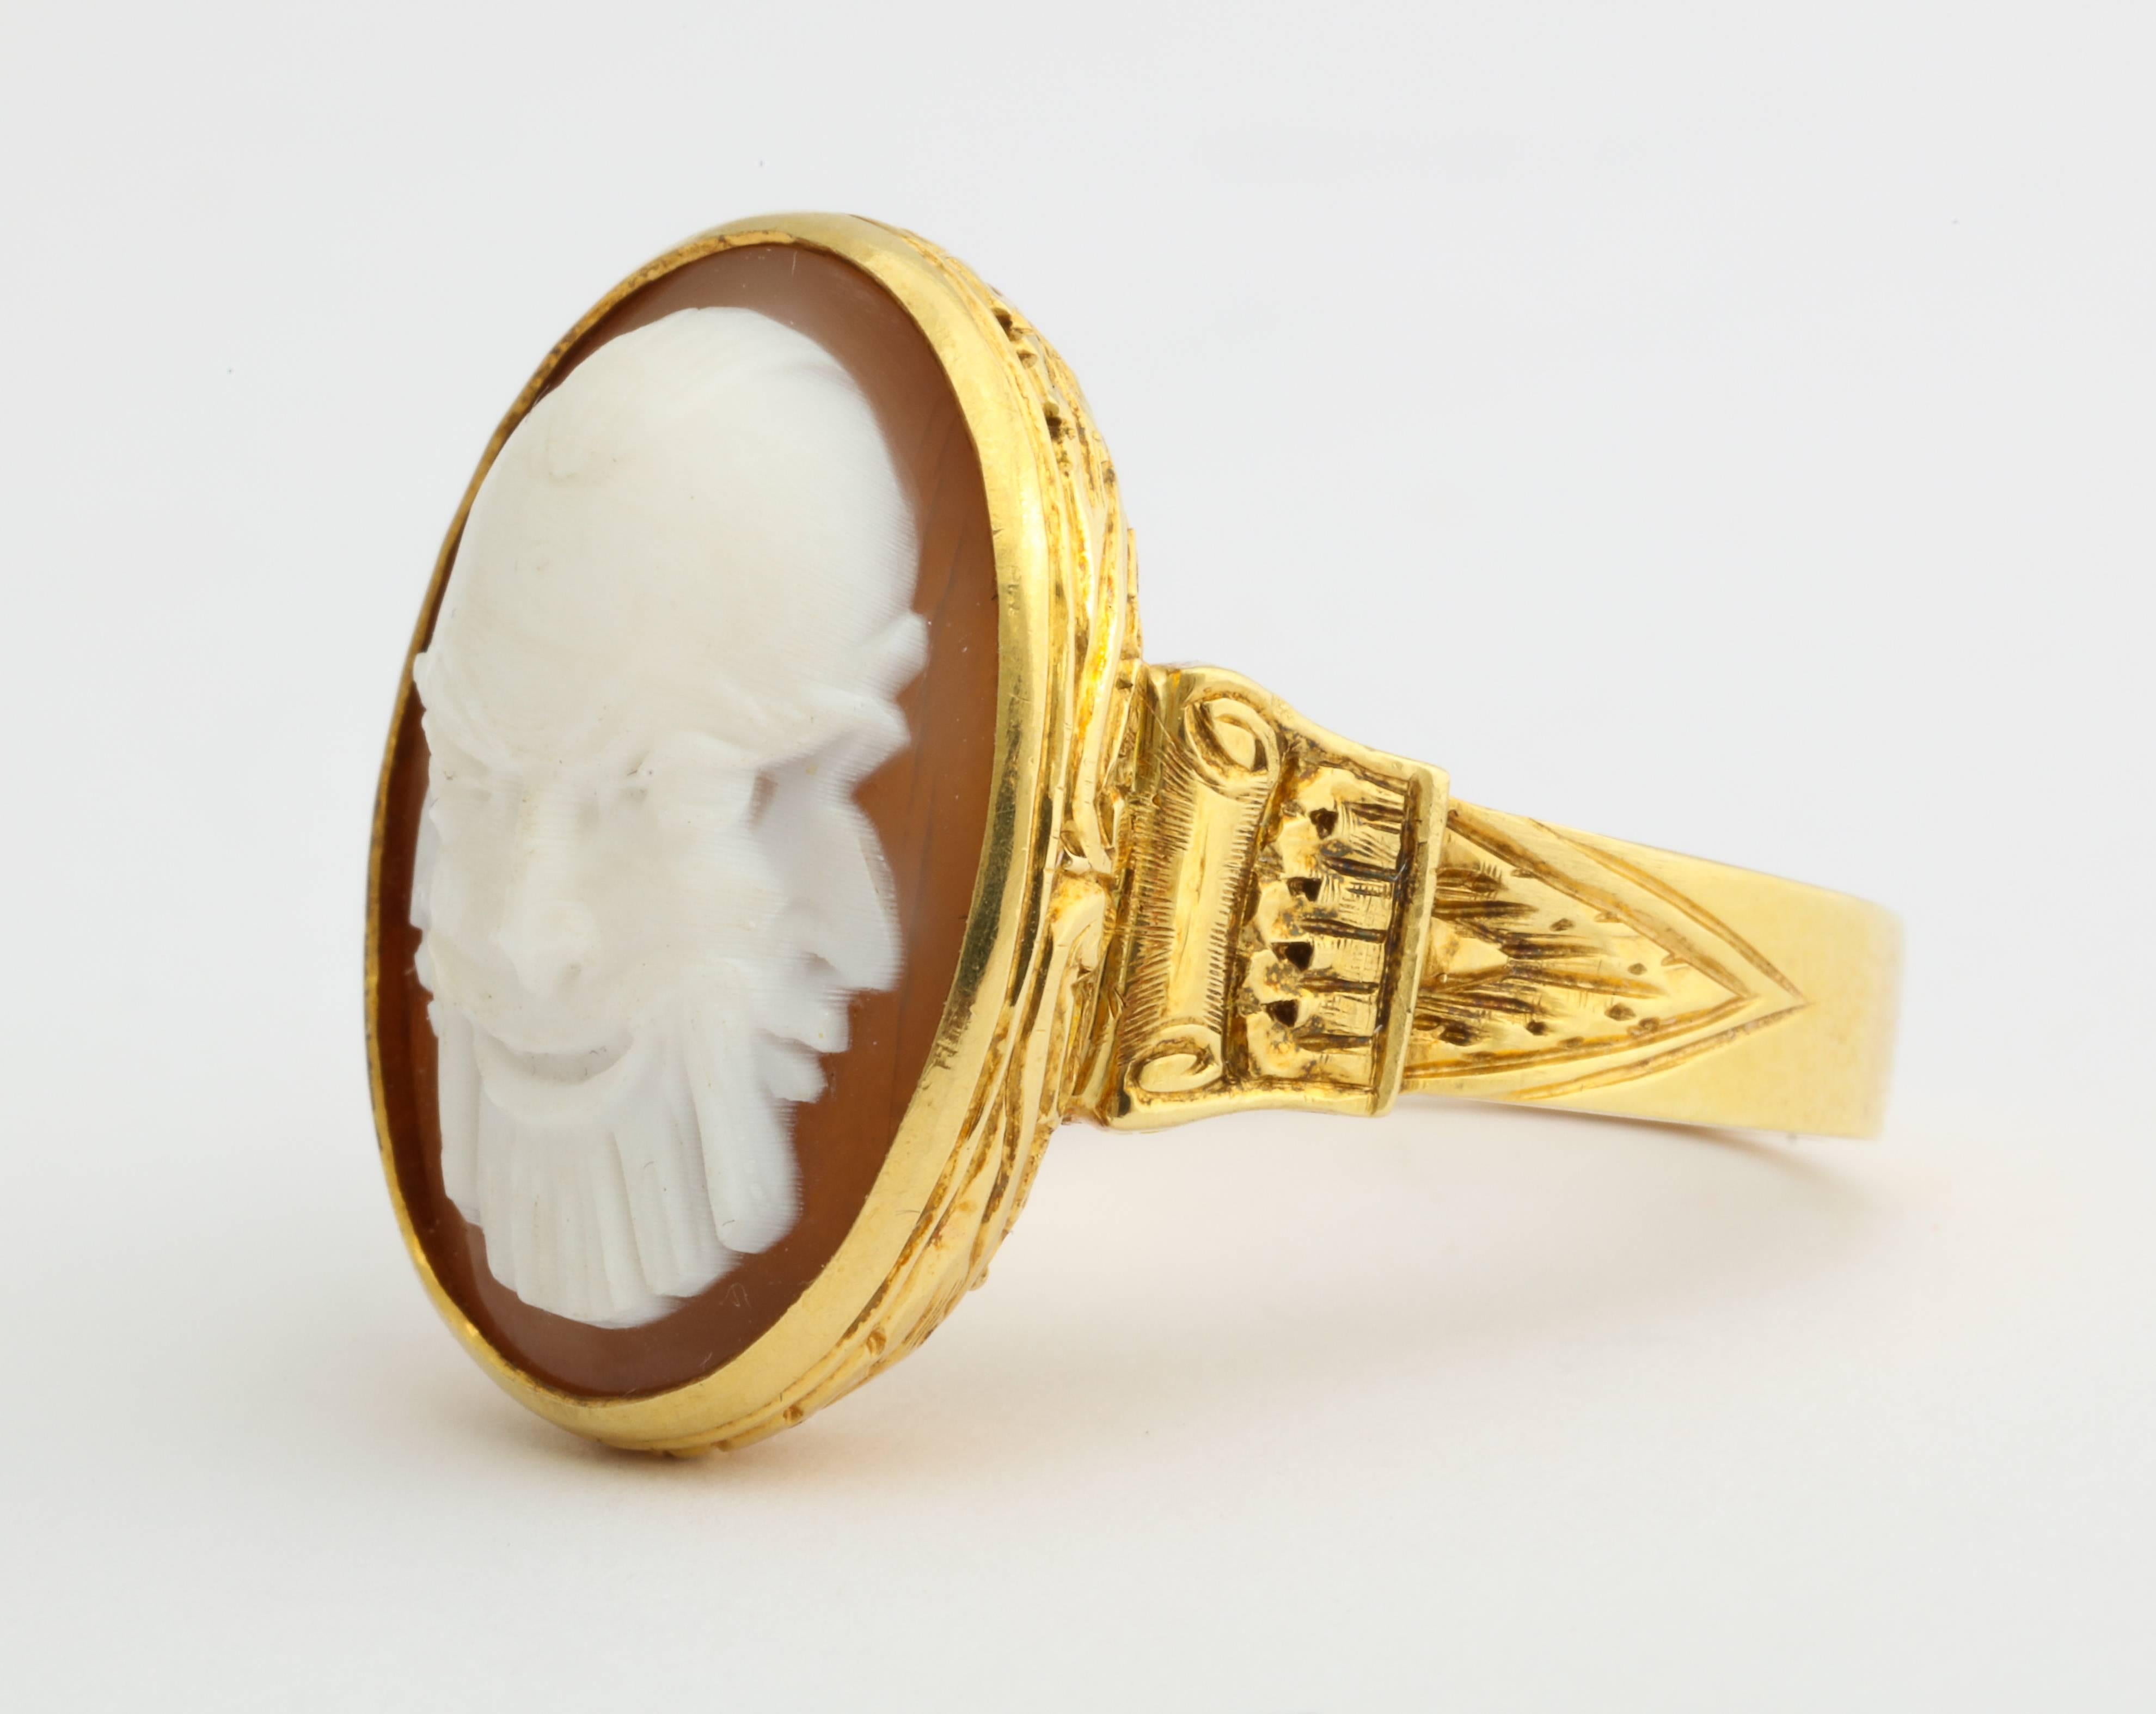 Handsome and impressive scale, this unusual 18K man's ring features a finely carved cameo in the Classical Greek manner. Fits a size 11 3/4 to 12 finger. Gold mark.